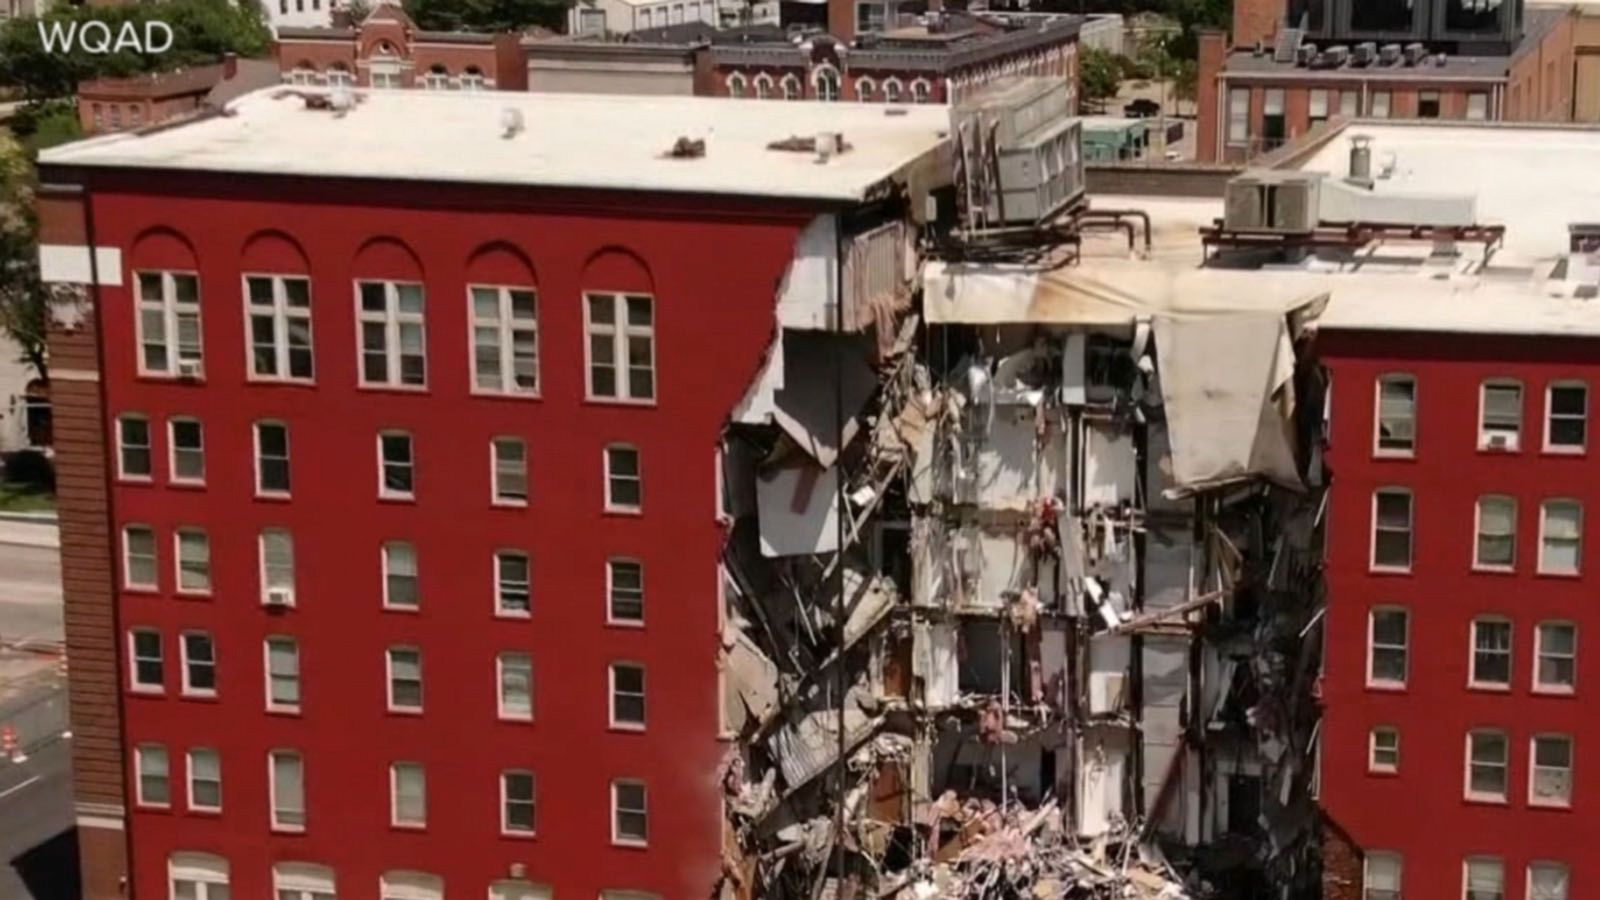 Demolition of collapsed building on hold - Good Morning America